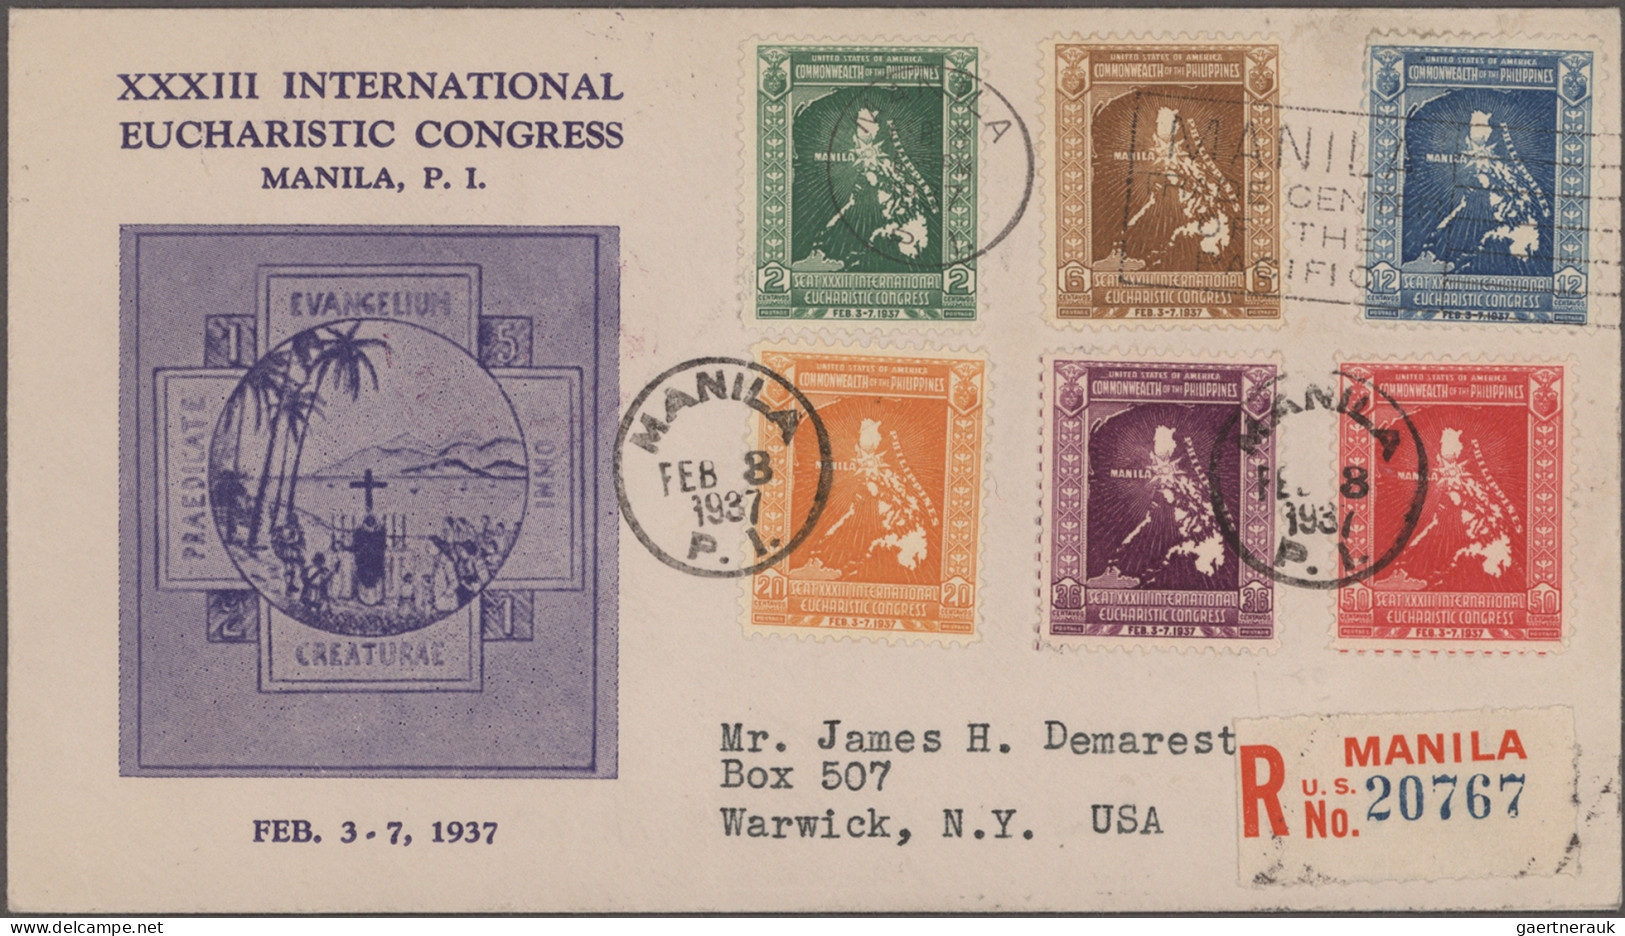 Philippines: 1926/2011, specialized collection of ca. 3210 FDC, chronologically